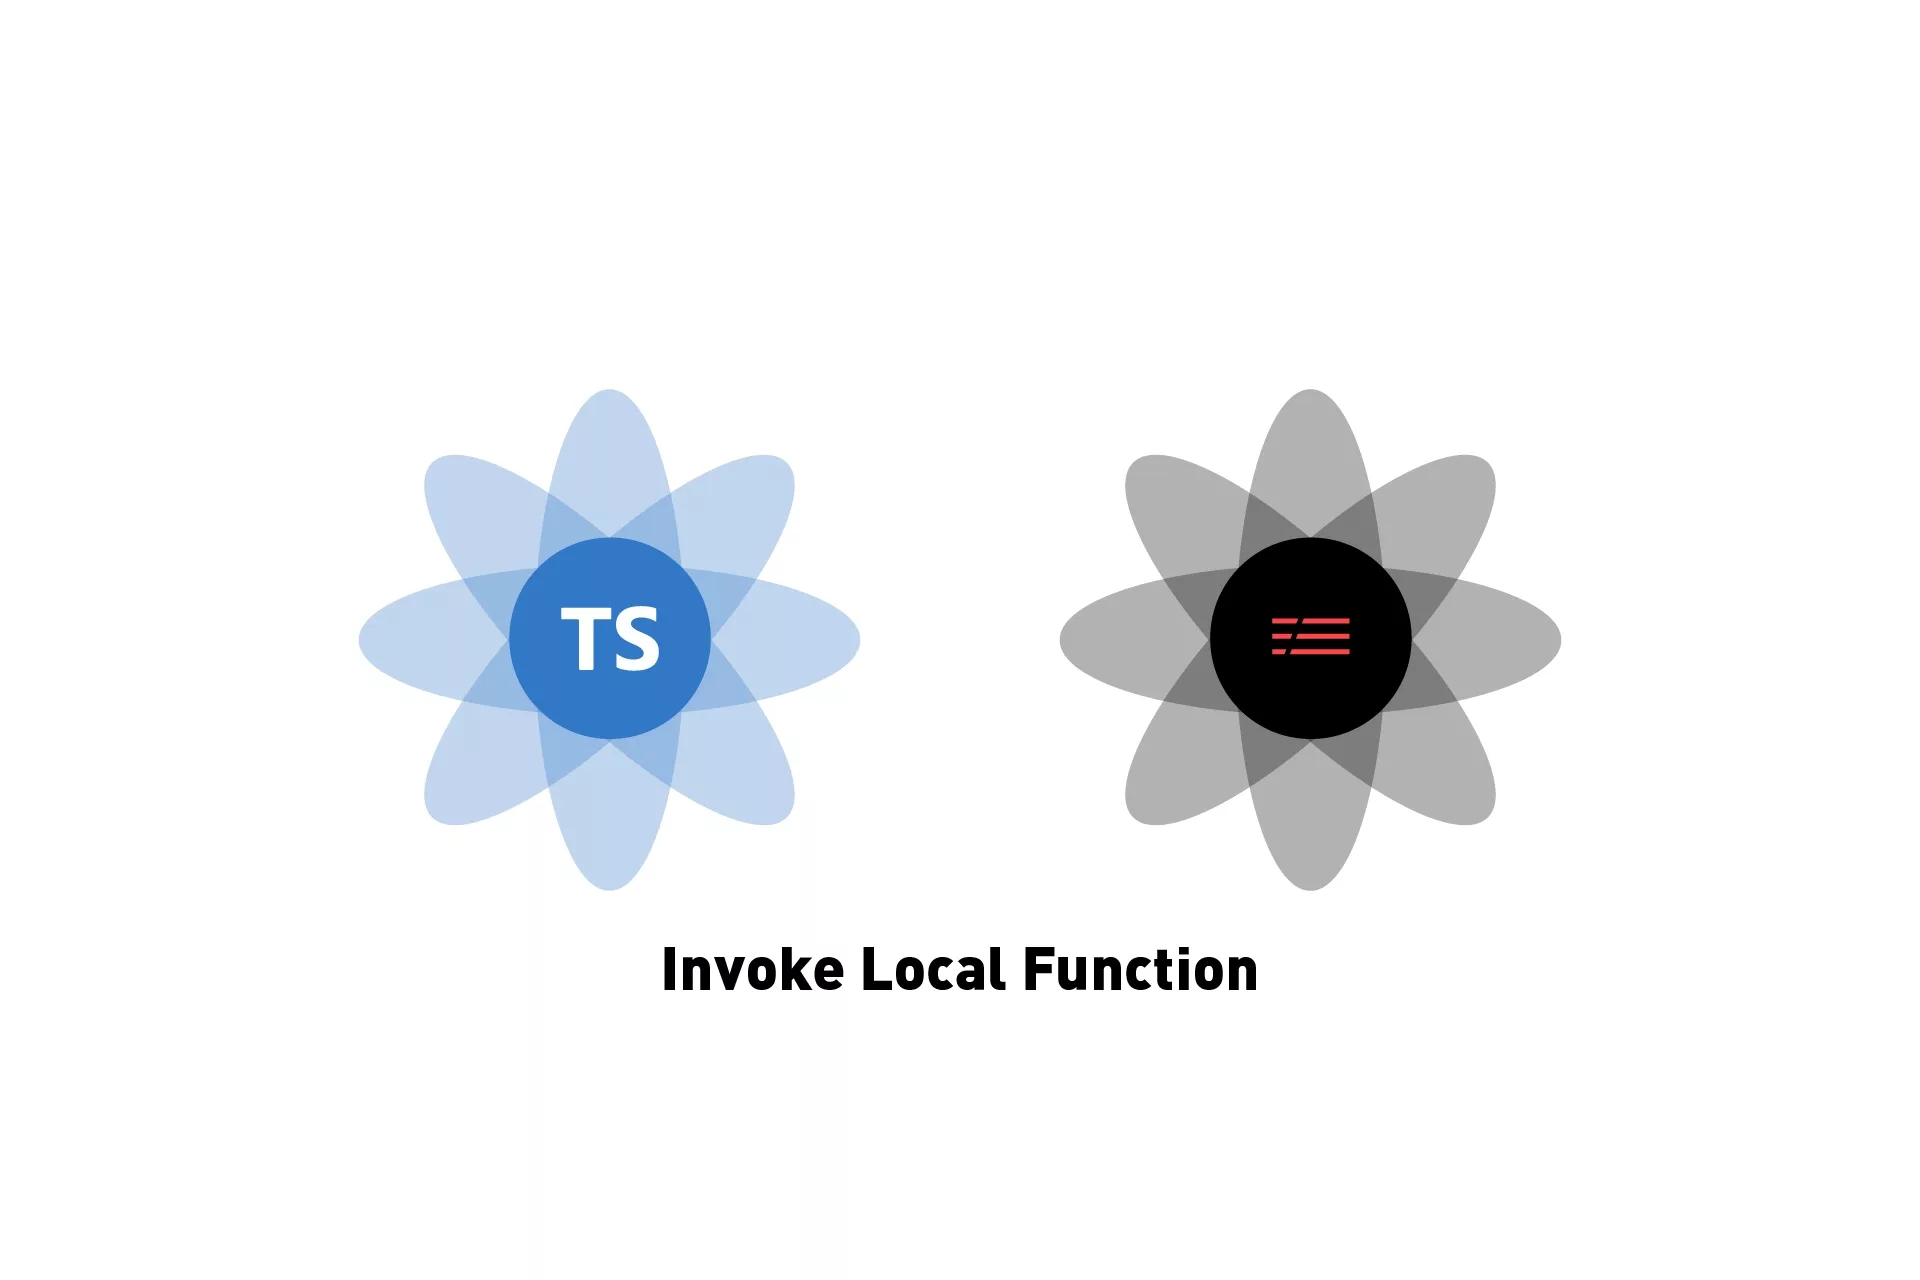 A flower that represents Typescript next to one that represents Serverless, below it sits the text "Invoke Local Function".